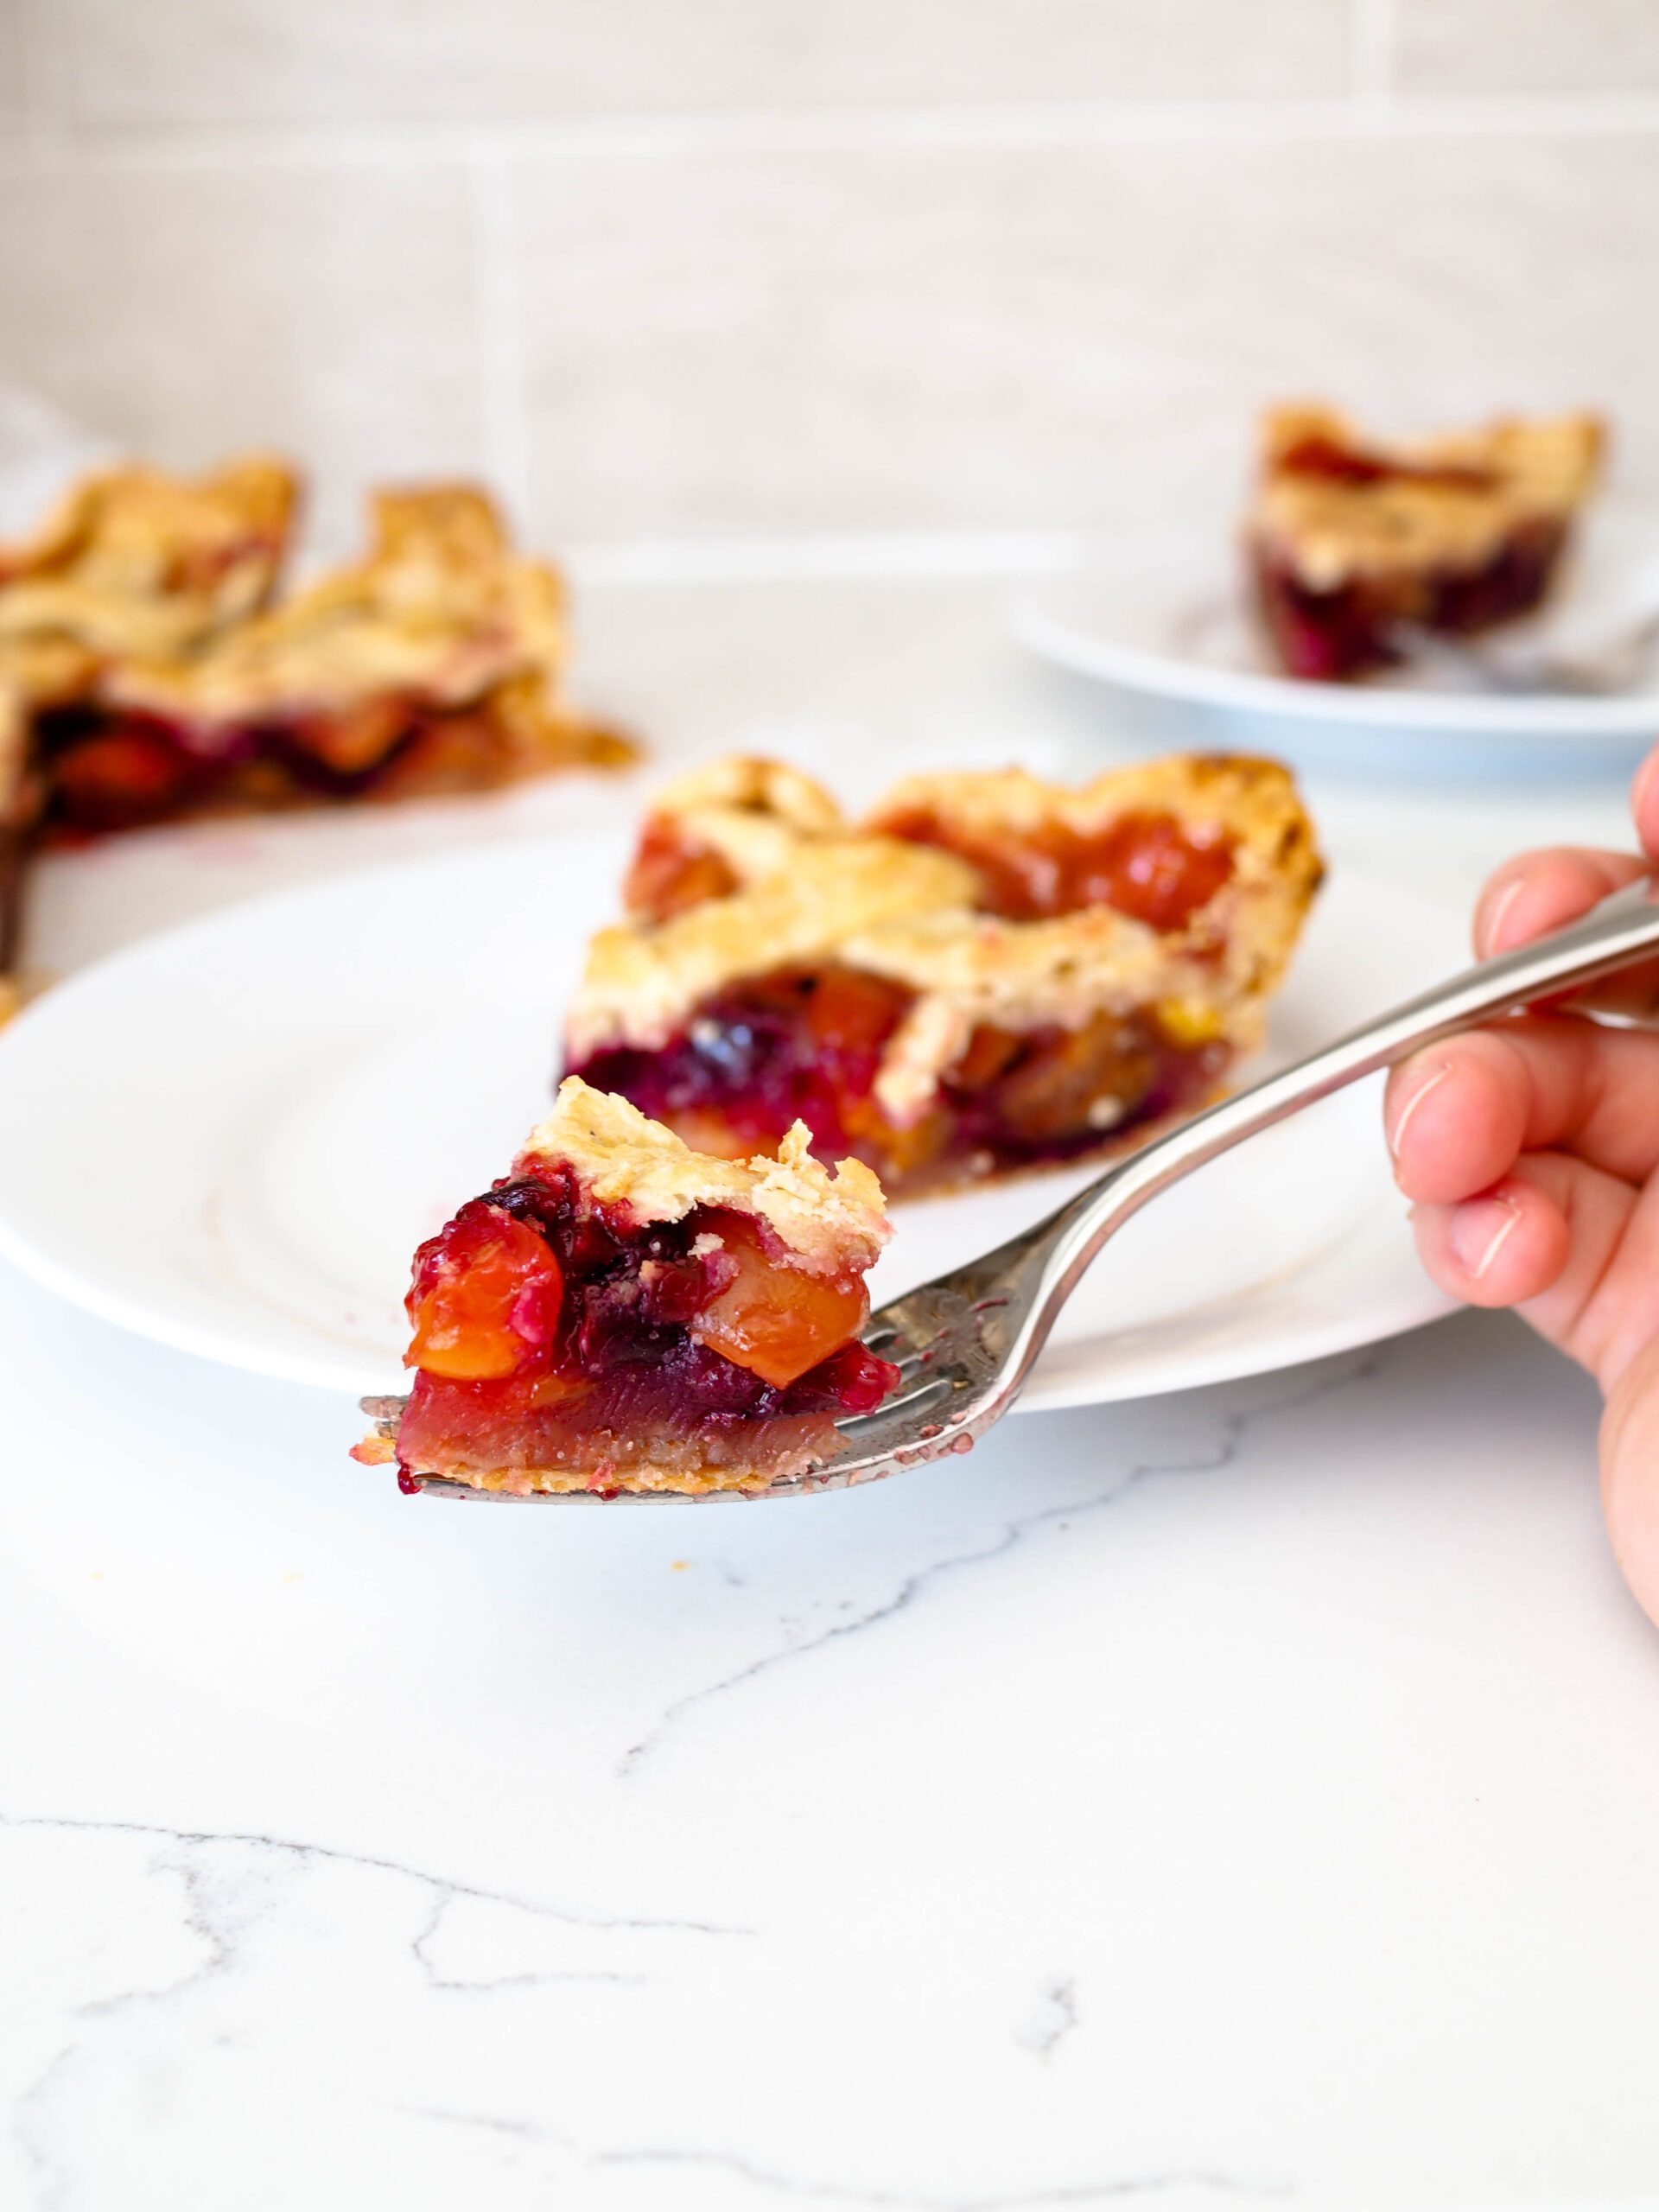 A closeup of a bite of cherry pie on a fork in front of a few slices of pie.